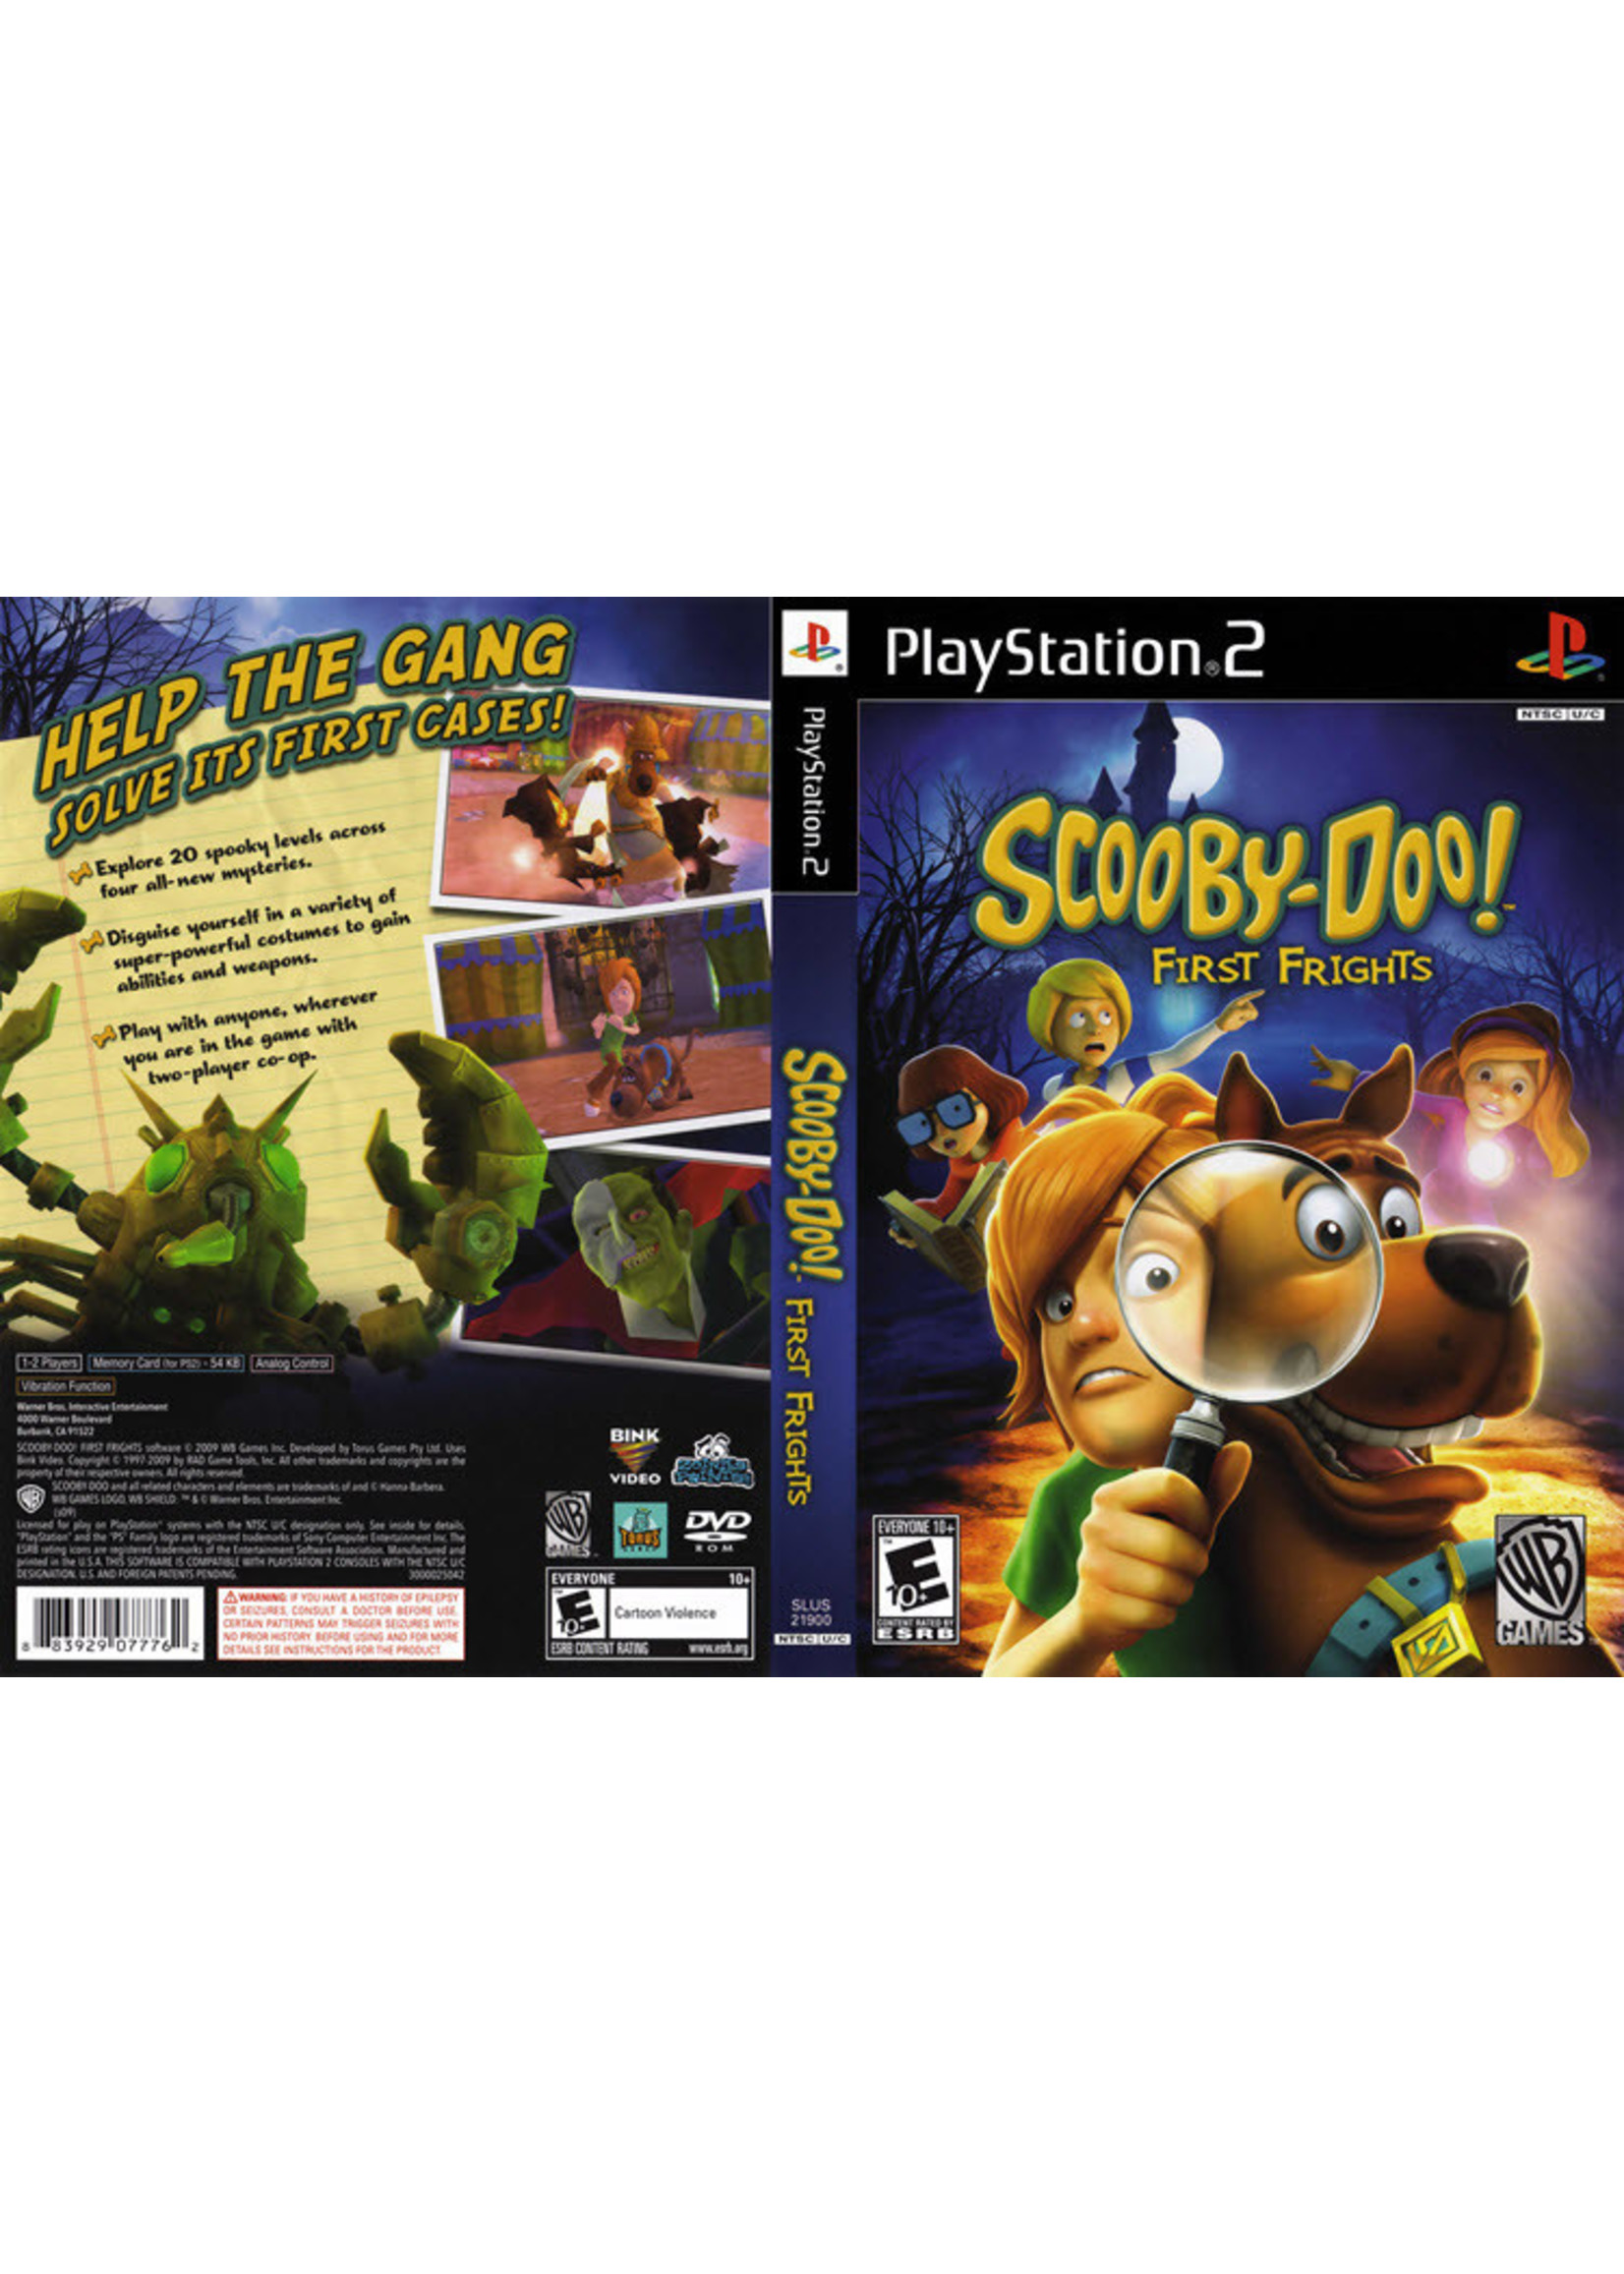 Sony Playstation 2 (PS2) Scooby-Doo! First Frights